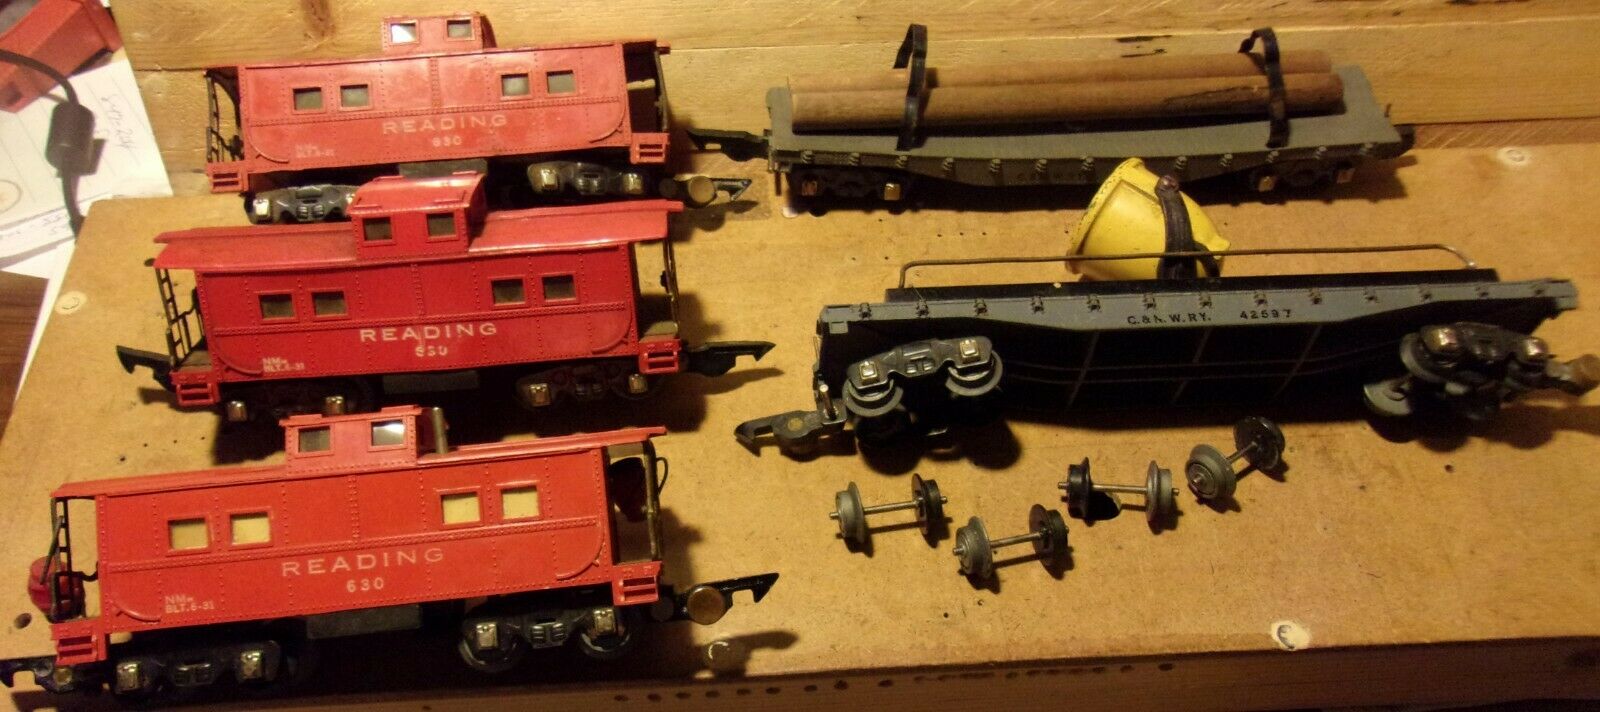 5 American Flyer S Gauge Frt Cars 3 Cabooses 2 #630 & 1 #650 Lumber & Search Car